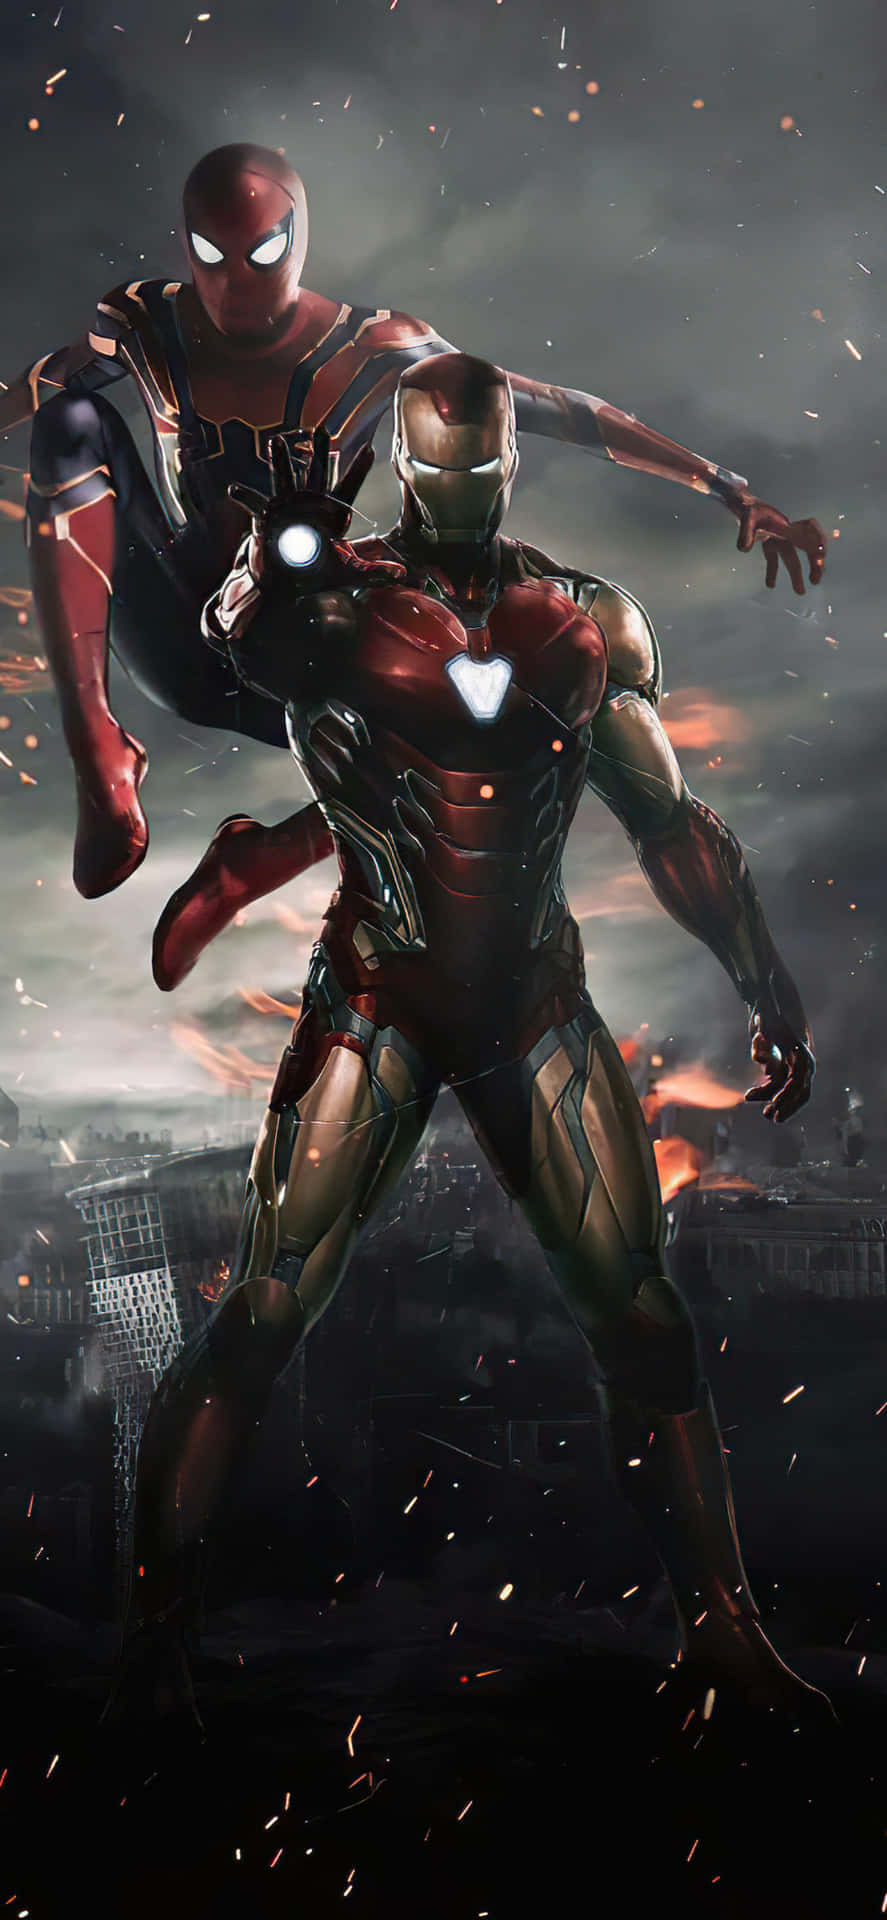 Download Iphone X Iron Man Background Iron Man With Spiderman |  